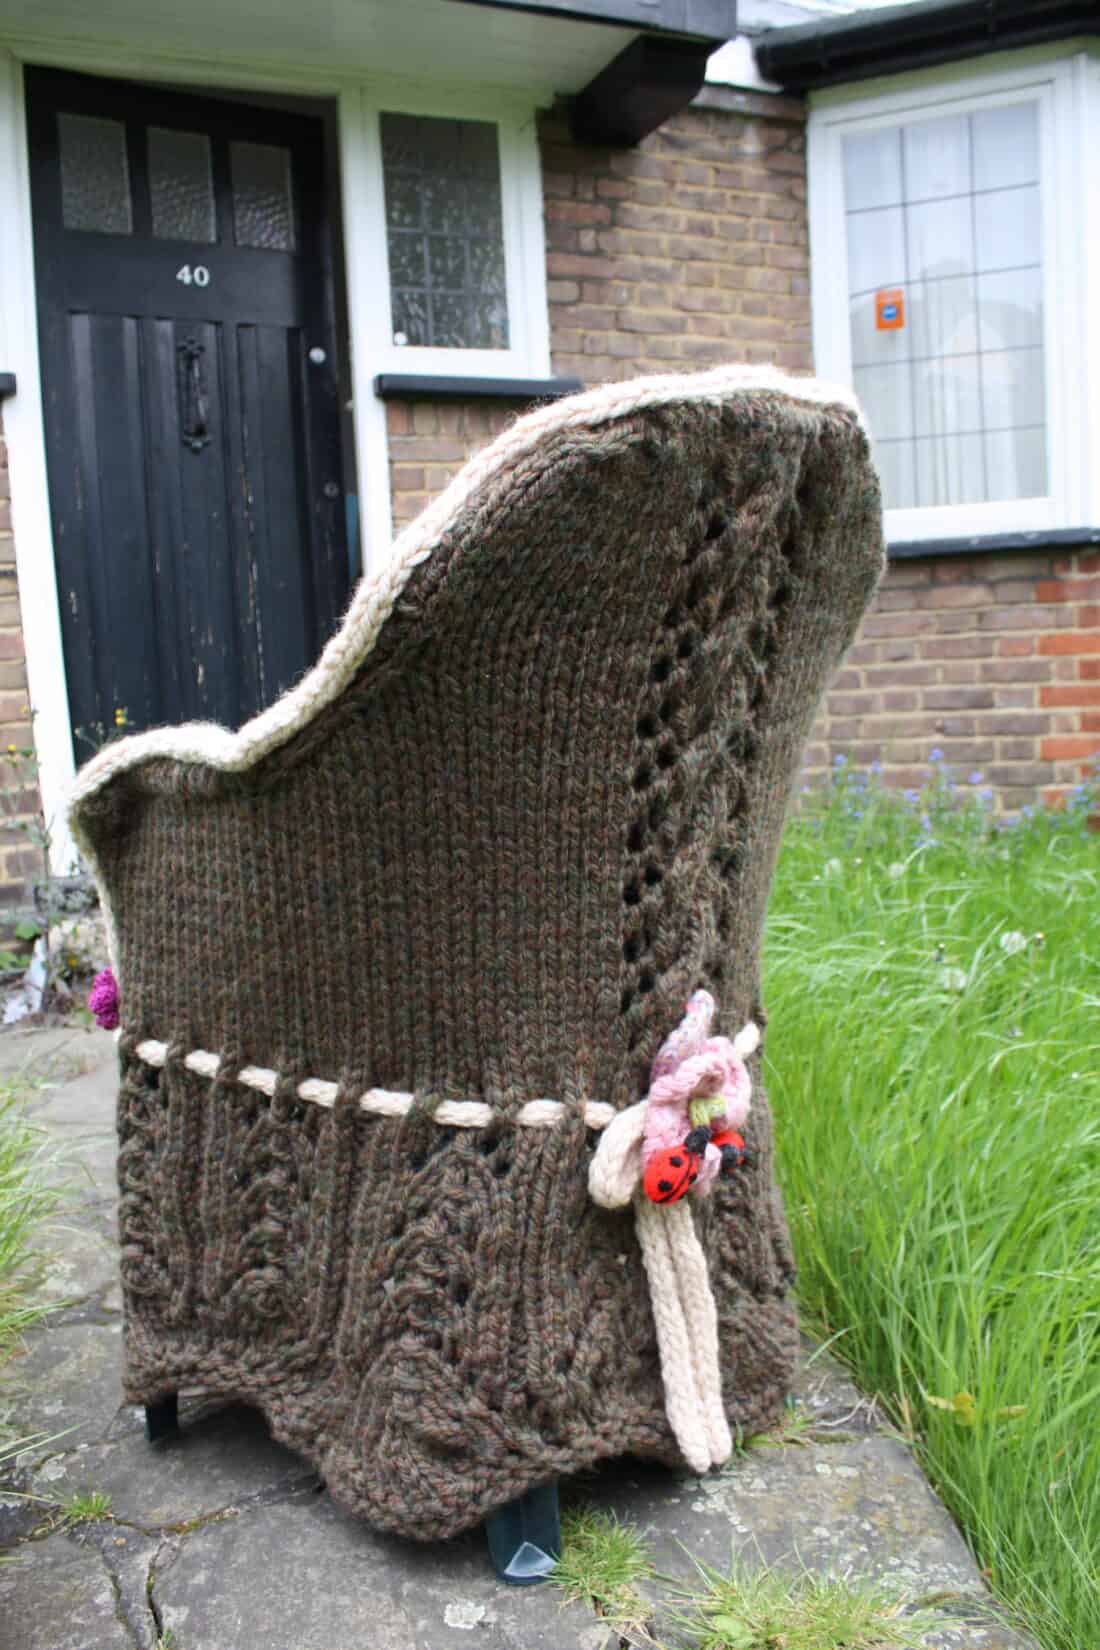 A knitted cozy covering a wingback chair outside a brick house.